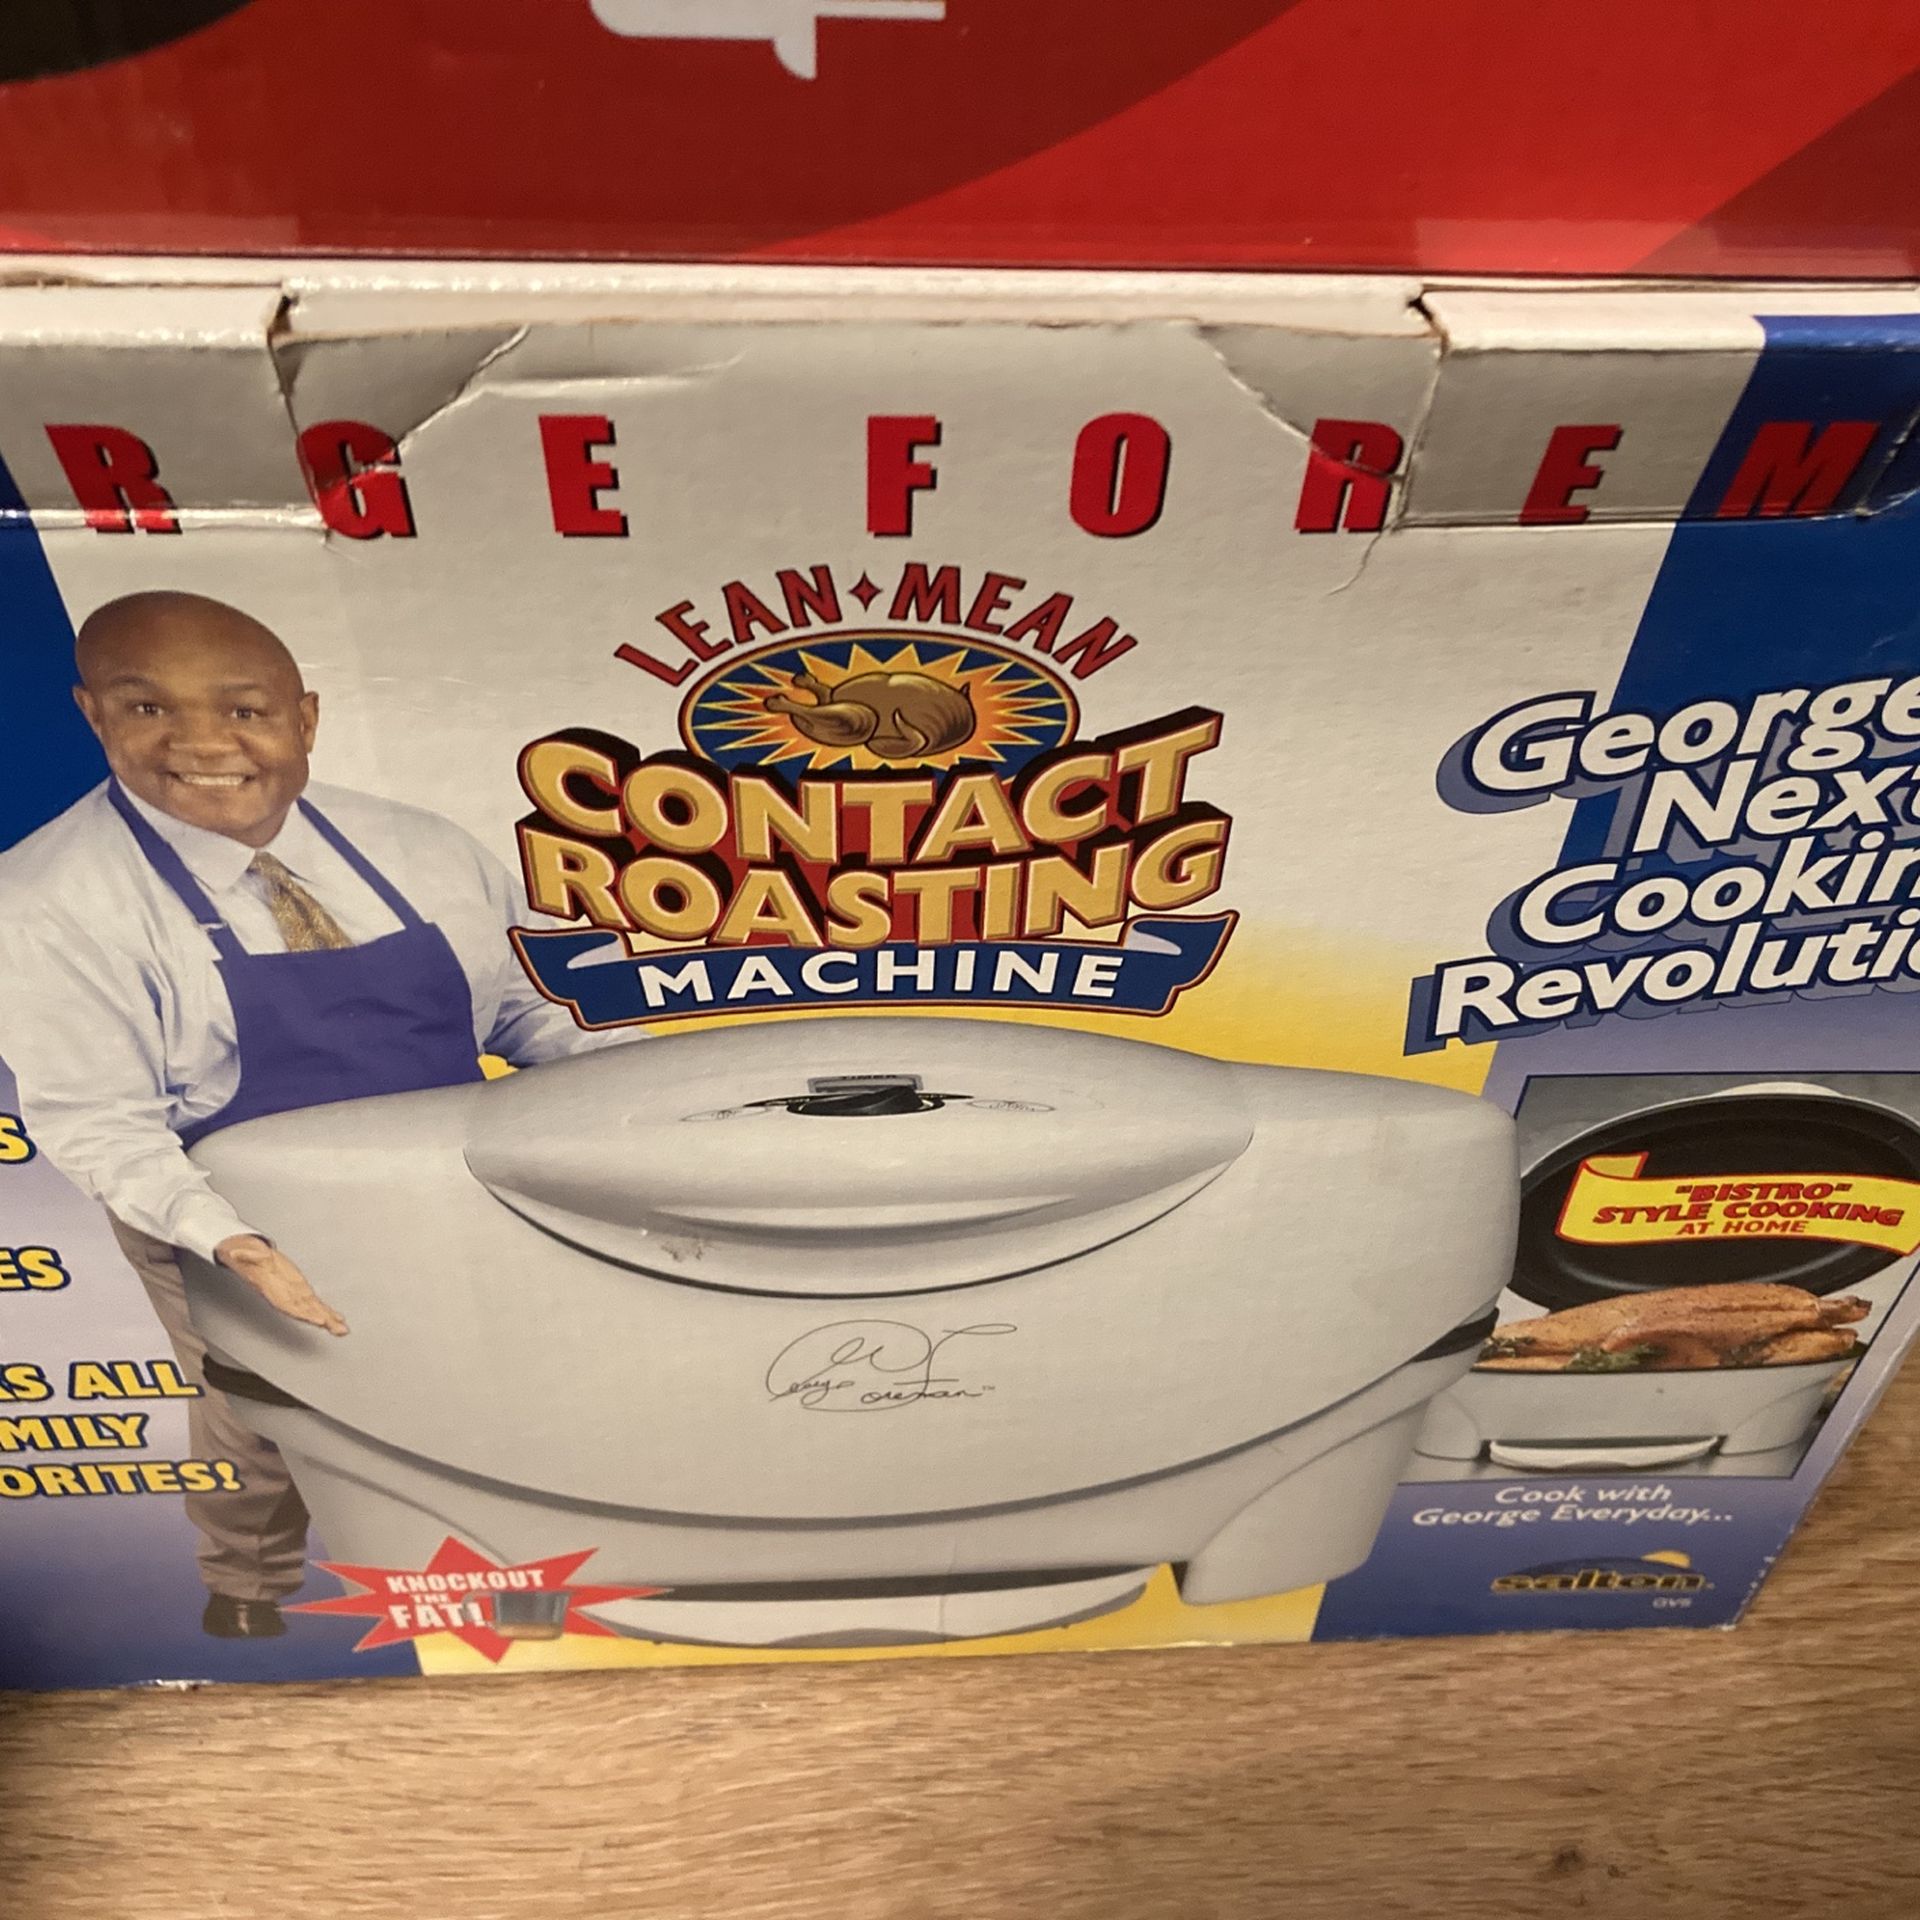 New In The Box George Foreman Lean Mean Constact Roasting Machine